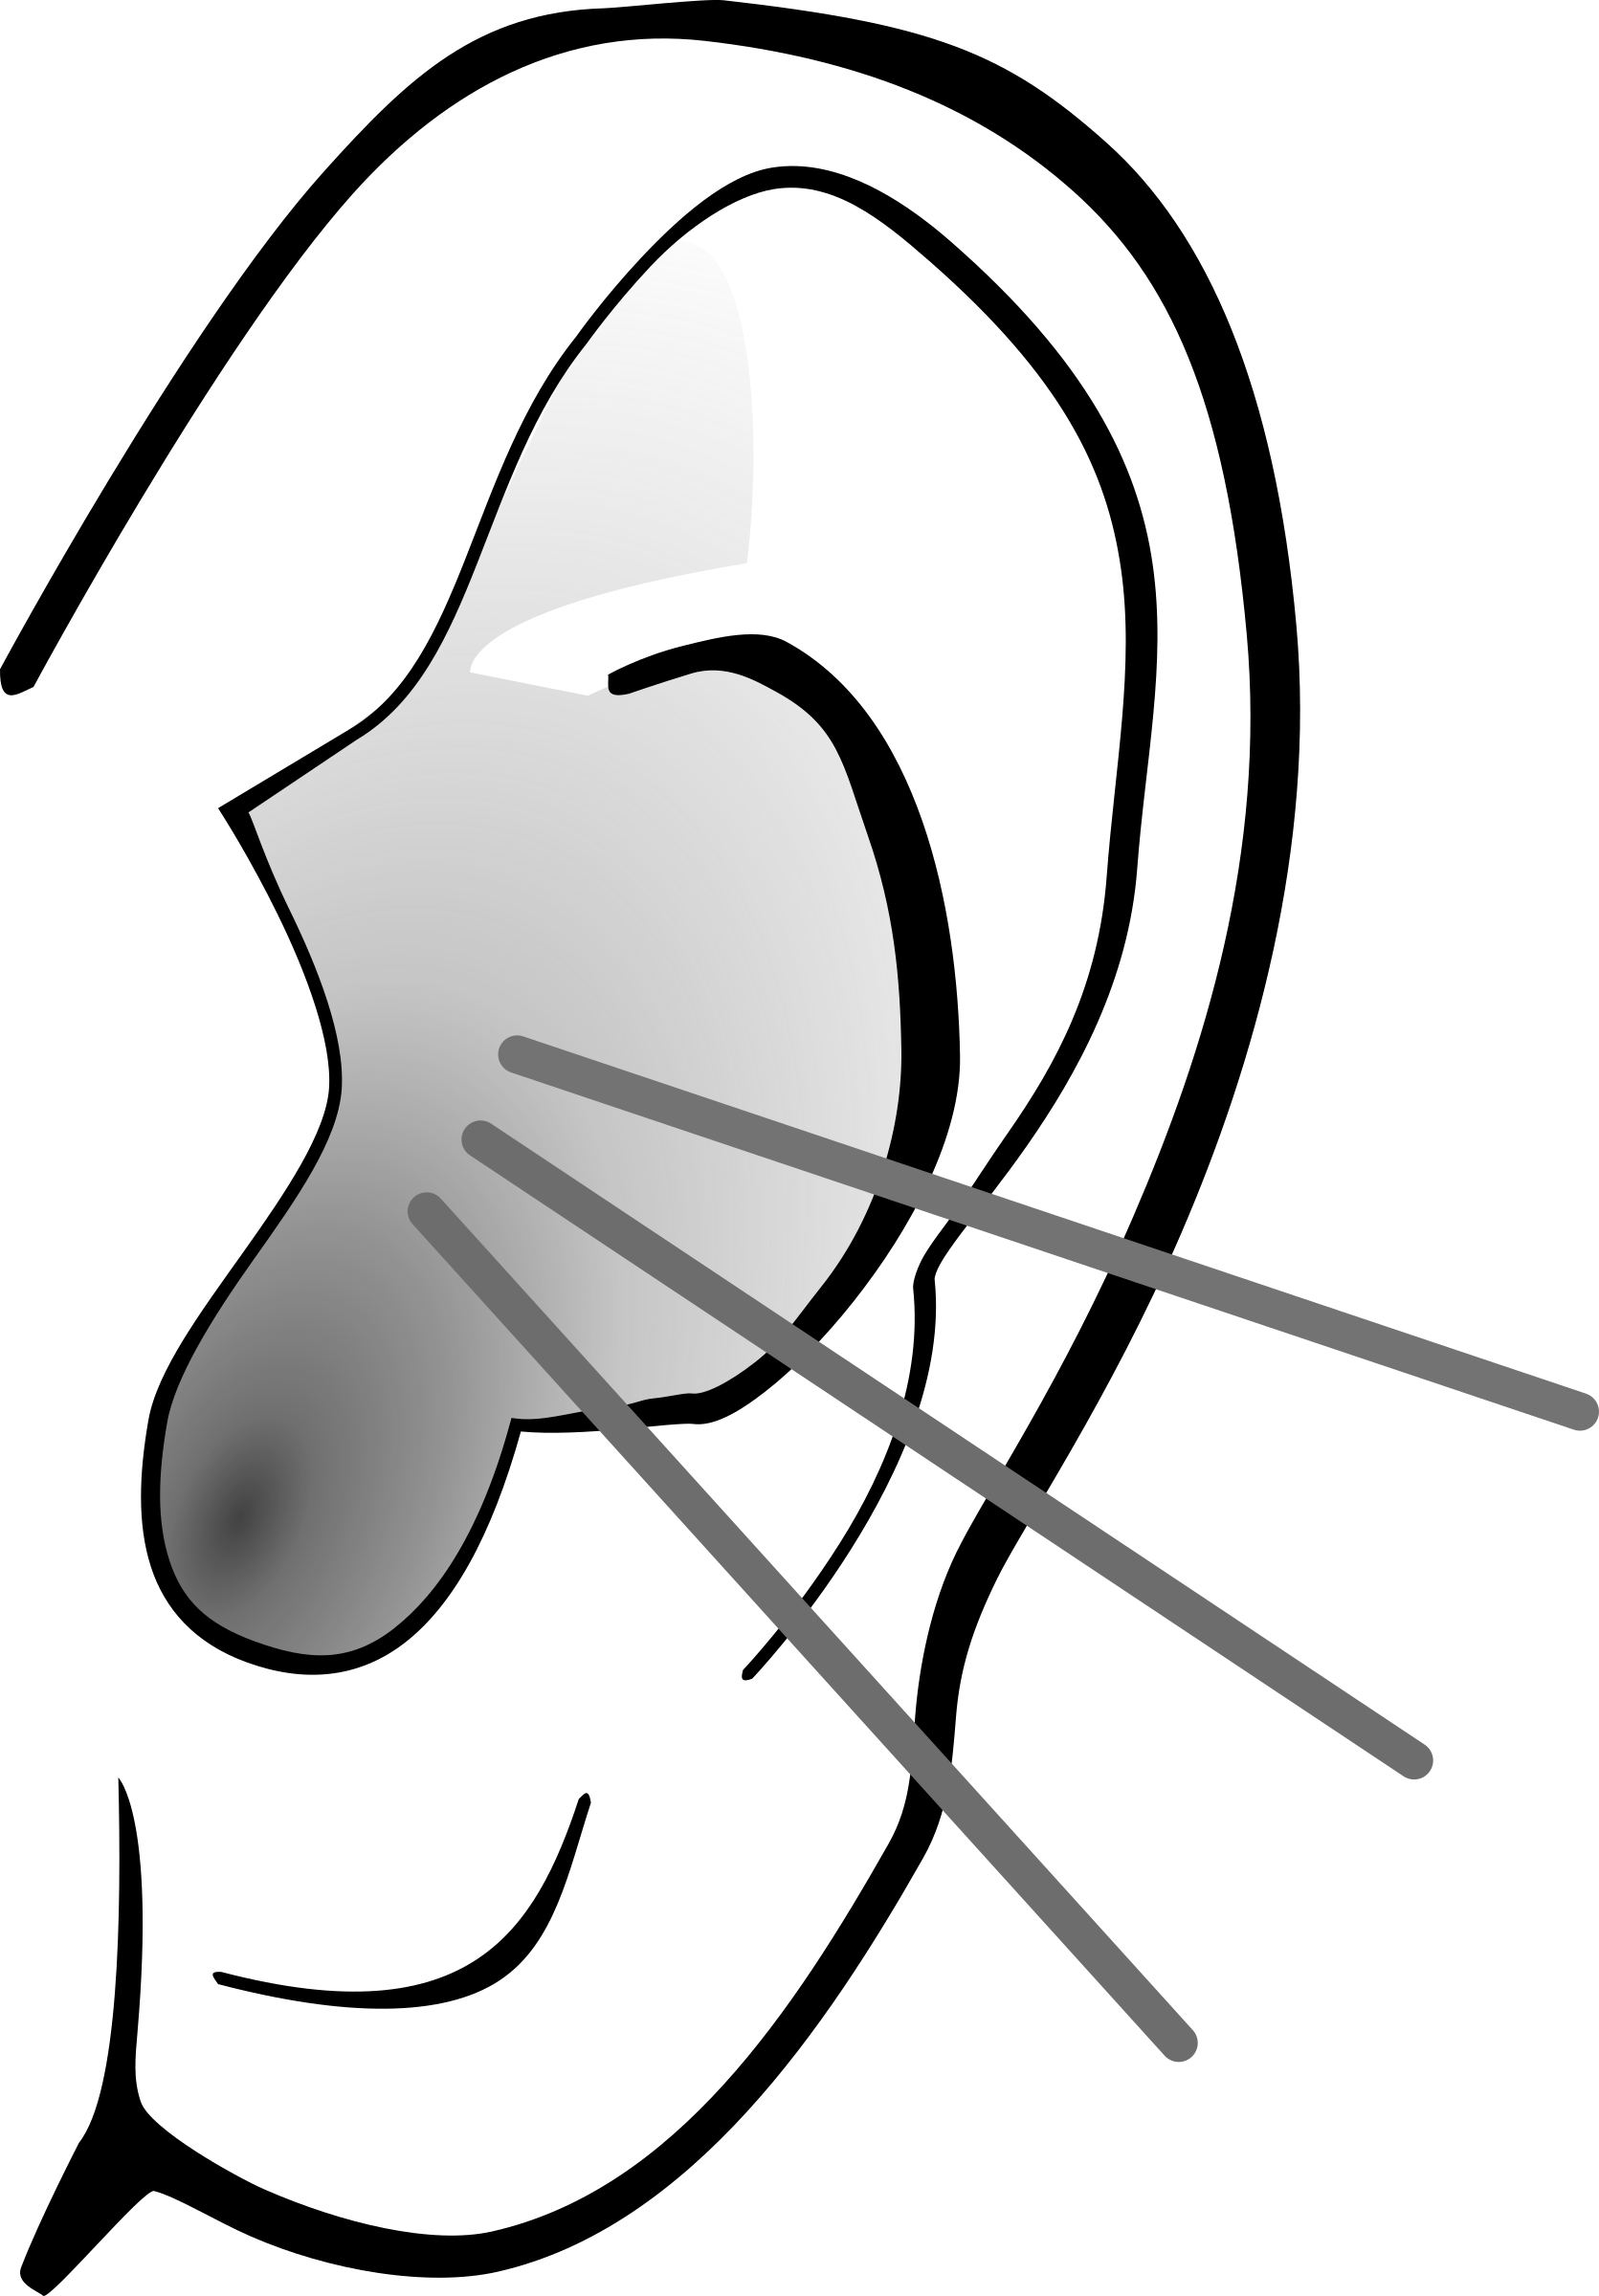 Listening Ear Image PNG Image